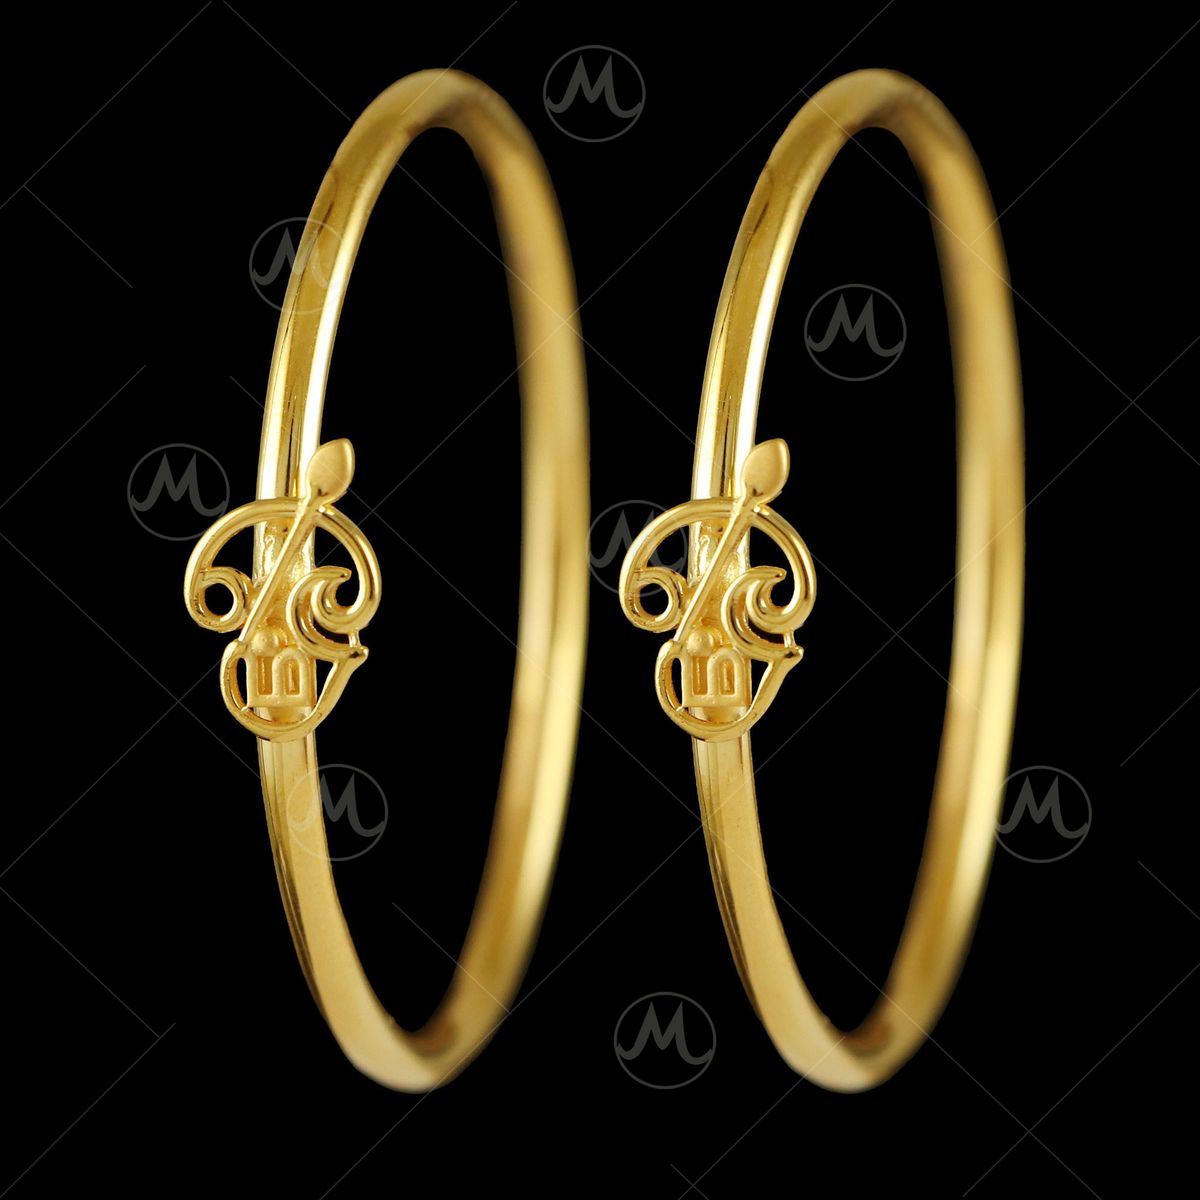 Shop Now: Gold Bangles in Cat Motif - Perfect for Feline Lovers!